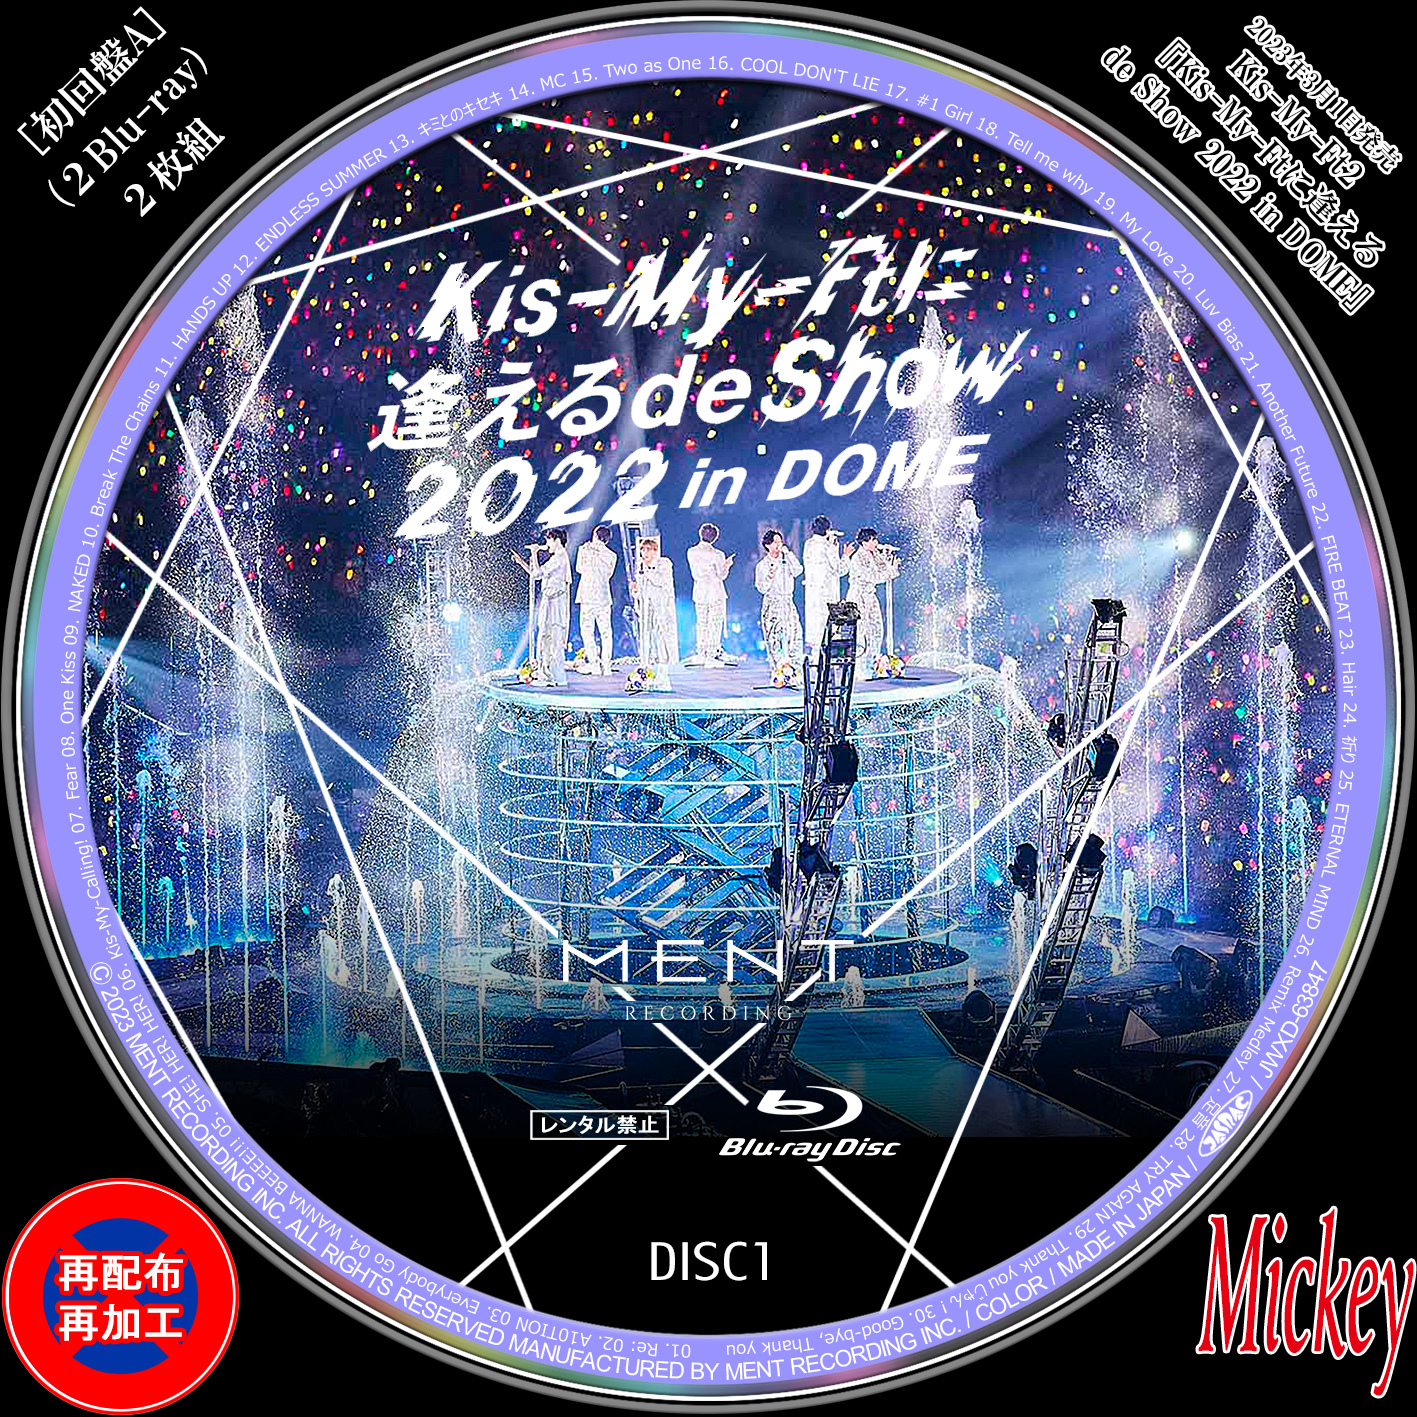 Kis-My-Ft2『Kis-My-Ftに逢える de Show 2022 in DOME』Blu-ray盤 ...